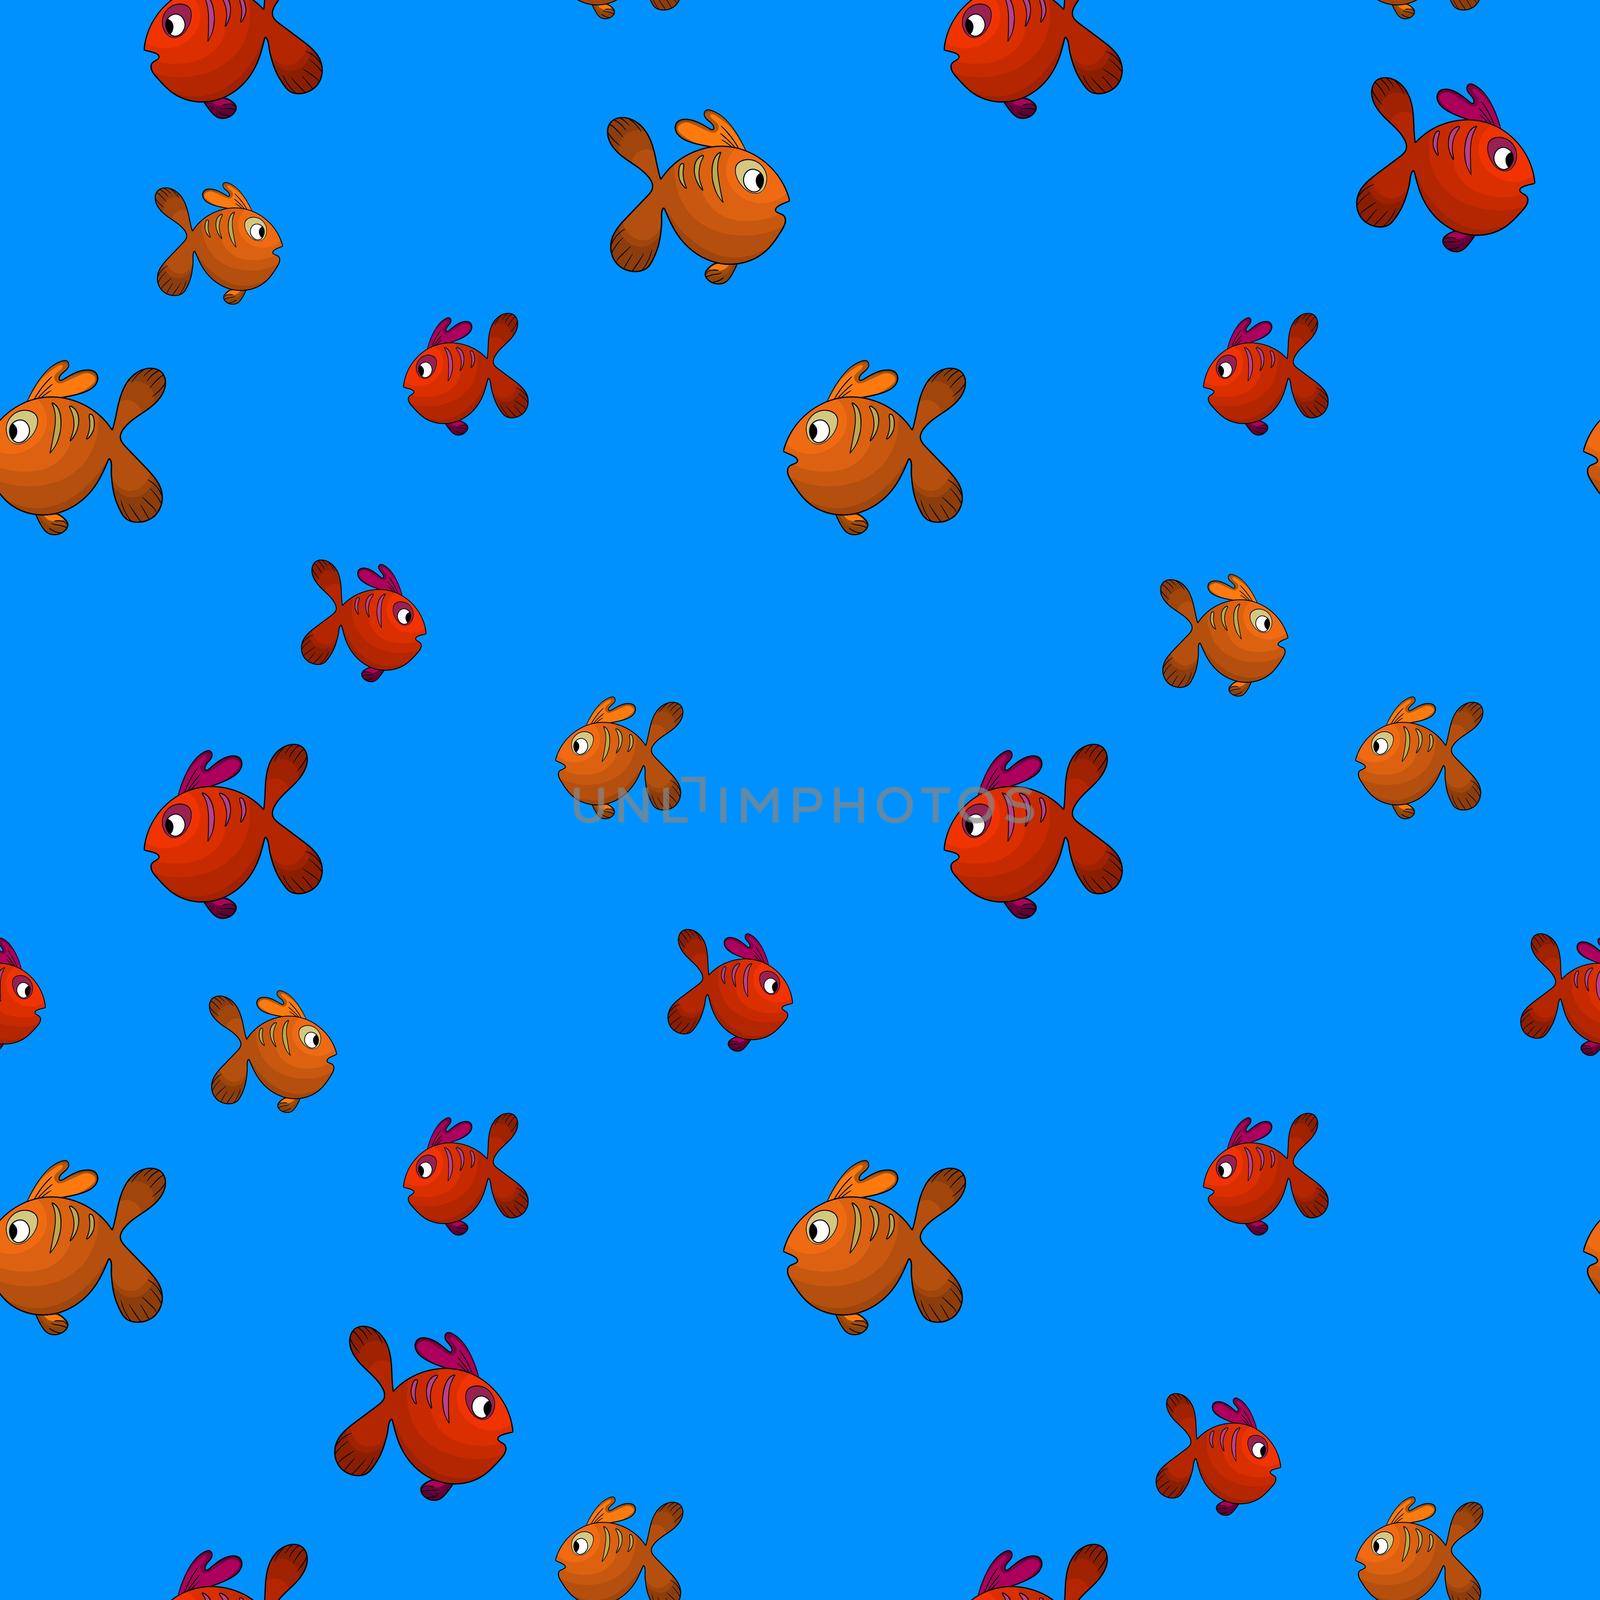 Seamless pattern with cute fish on blue background. Vector cartoon animals colorful illustration. Adorable character for cards, wallpaper, textile, fabric. Flat style.